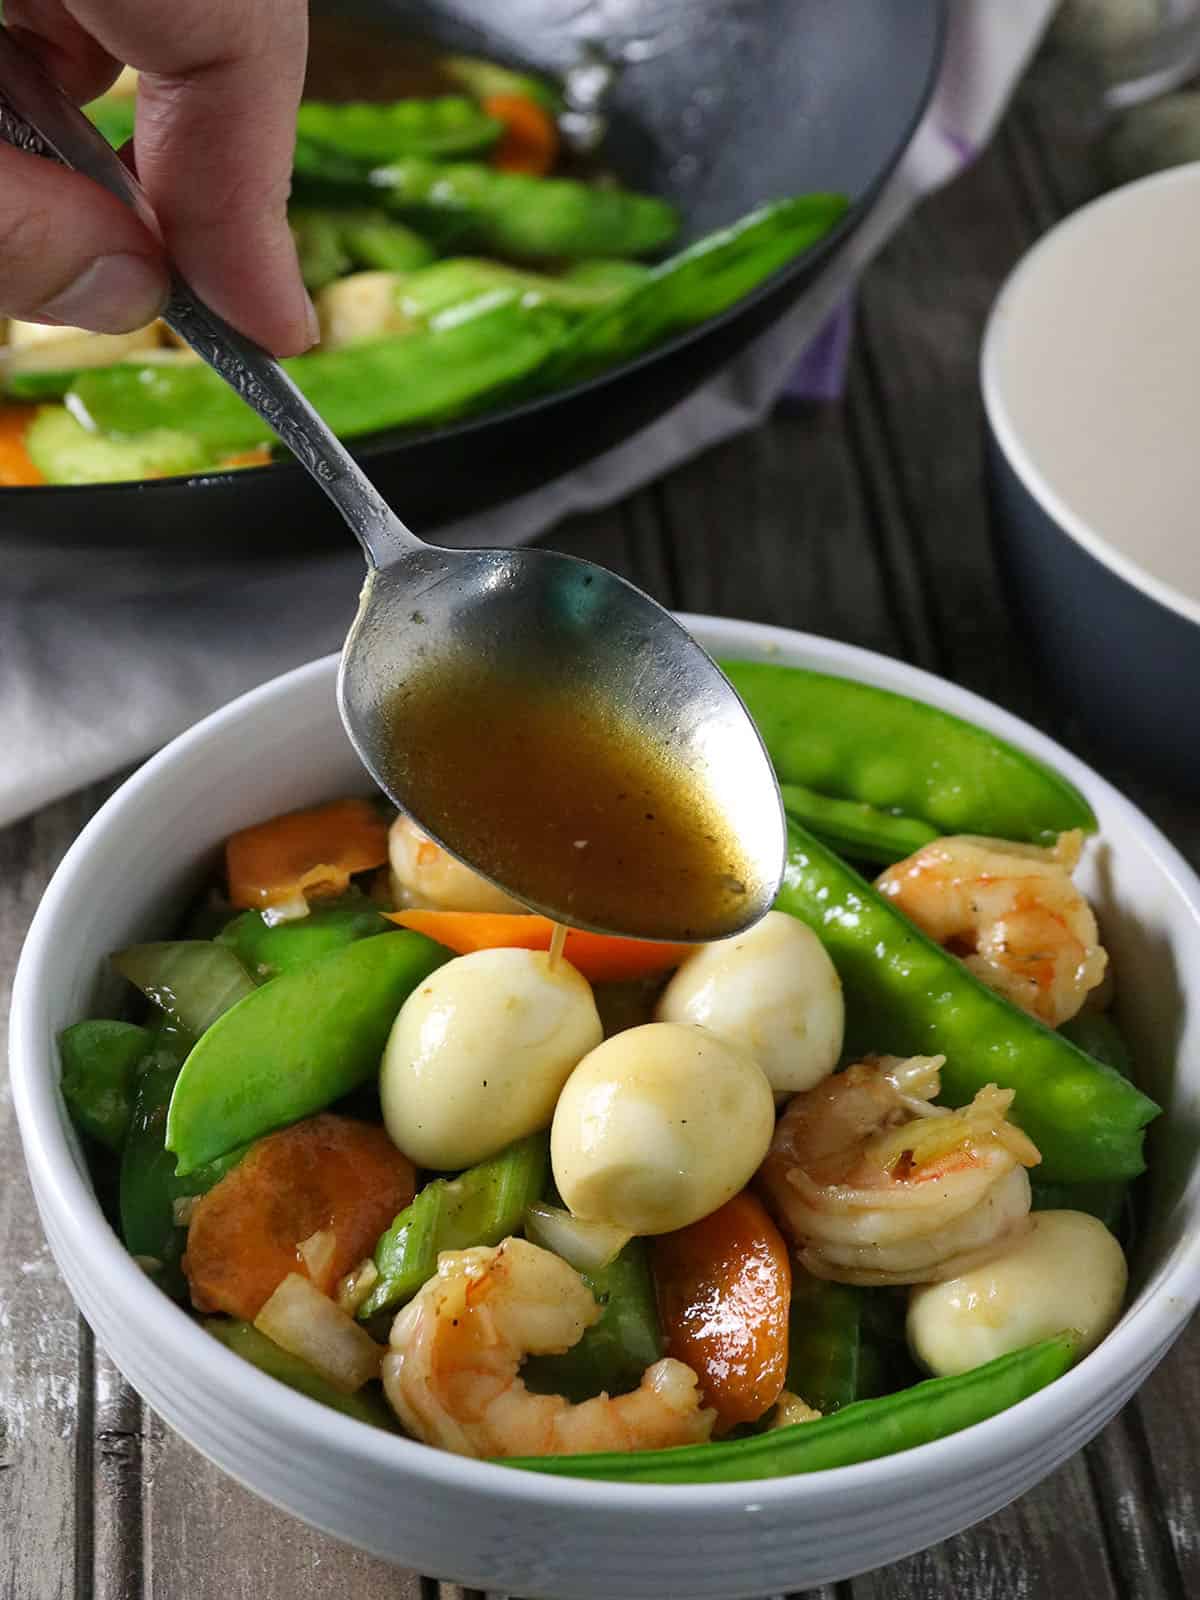 spooning sauce on vegetable stir fry in a white bowl